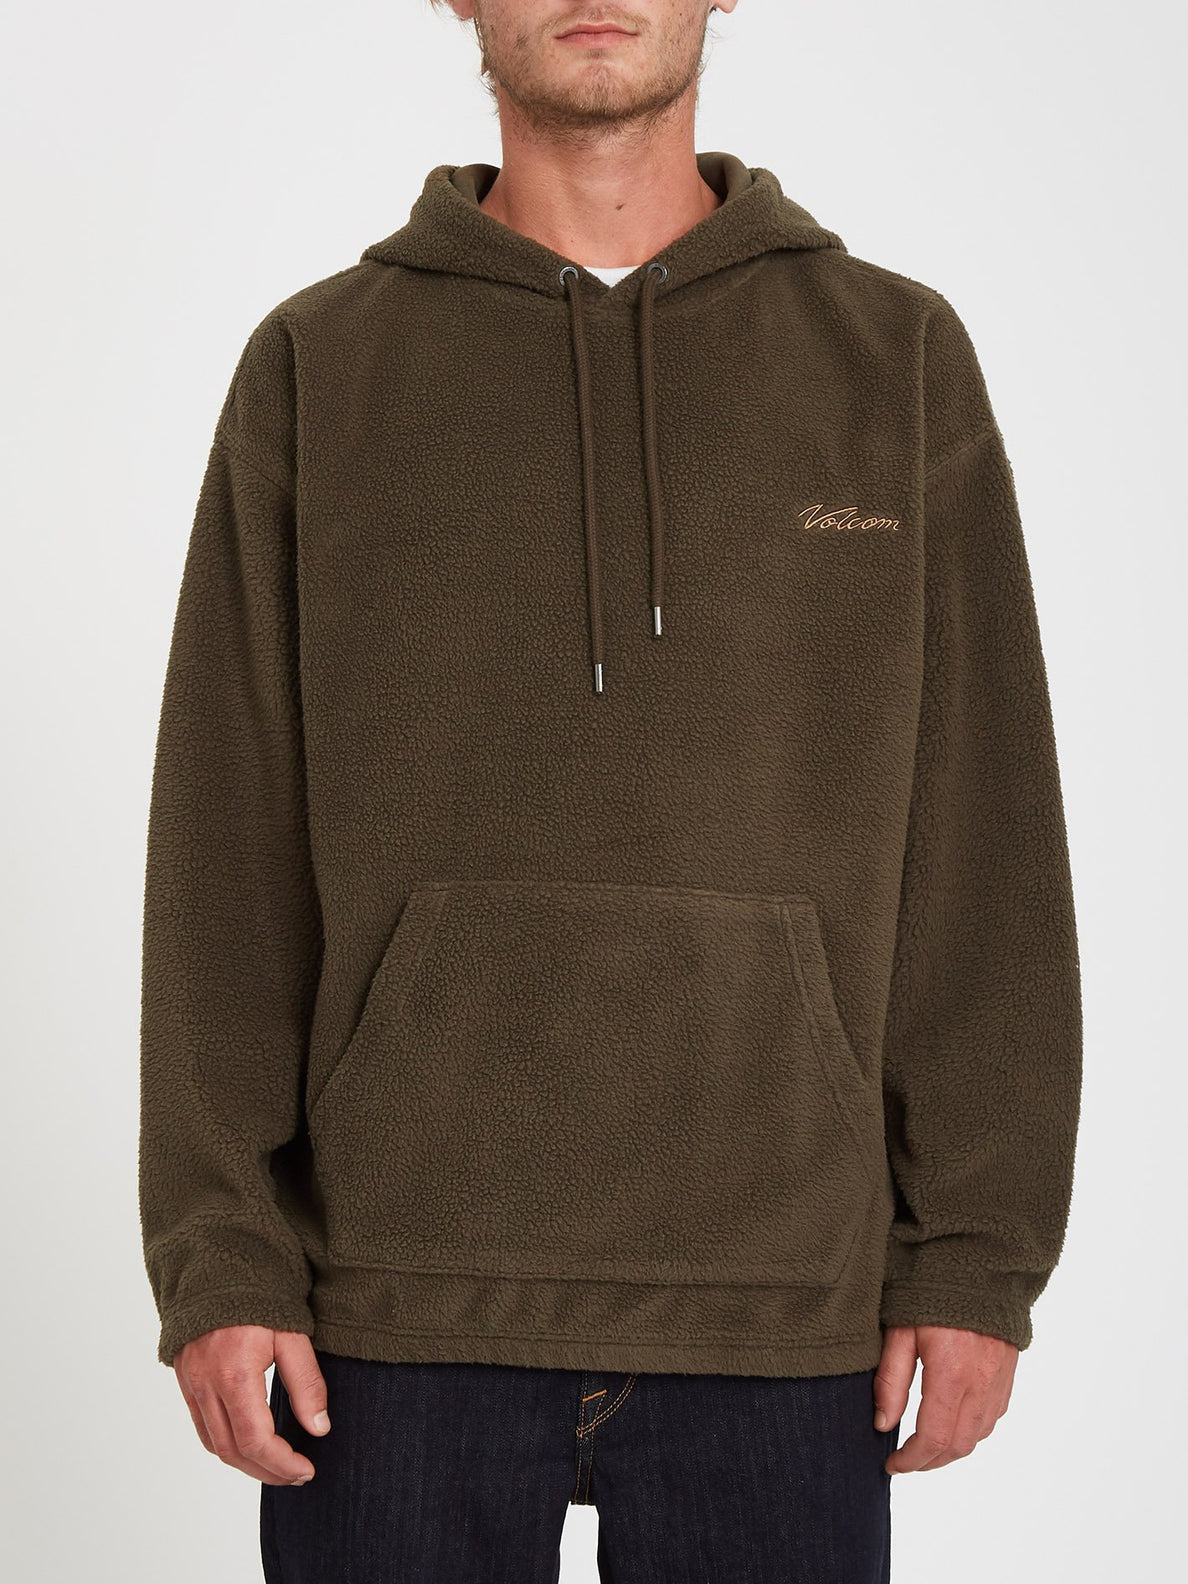 Throw Exceptions Hoodie - WREN (A4132101_WRE) [F]